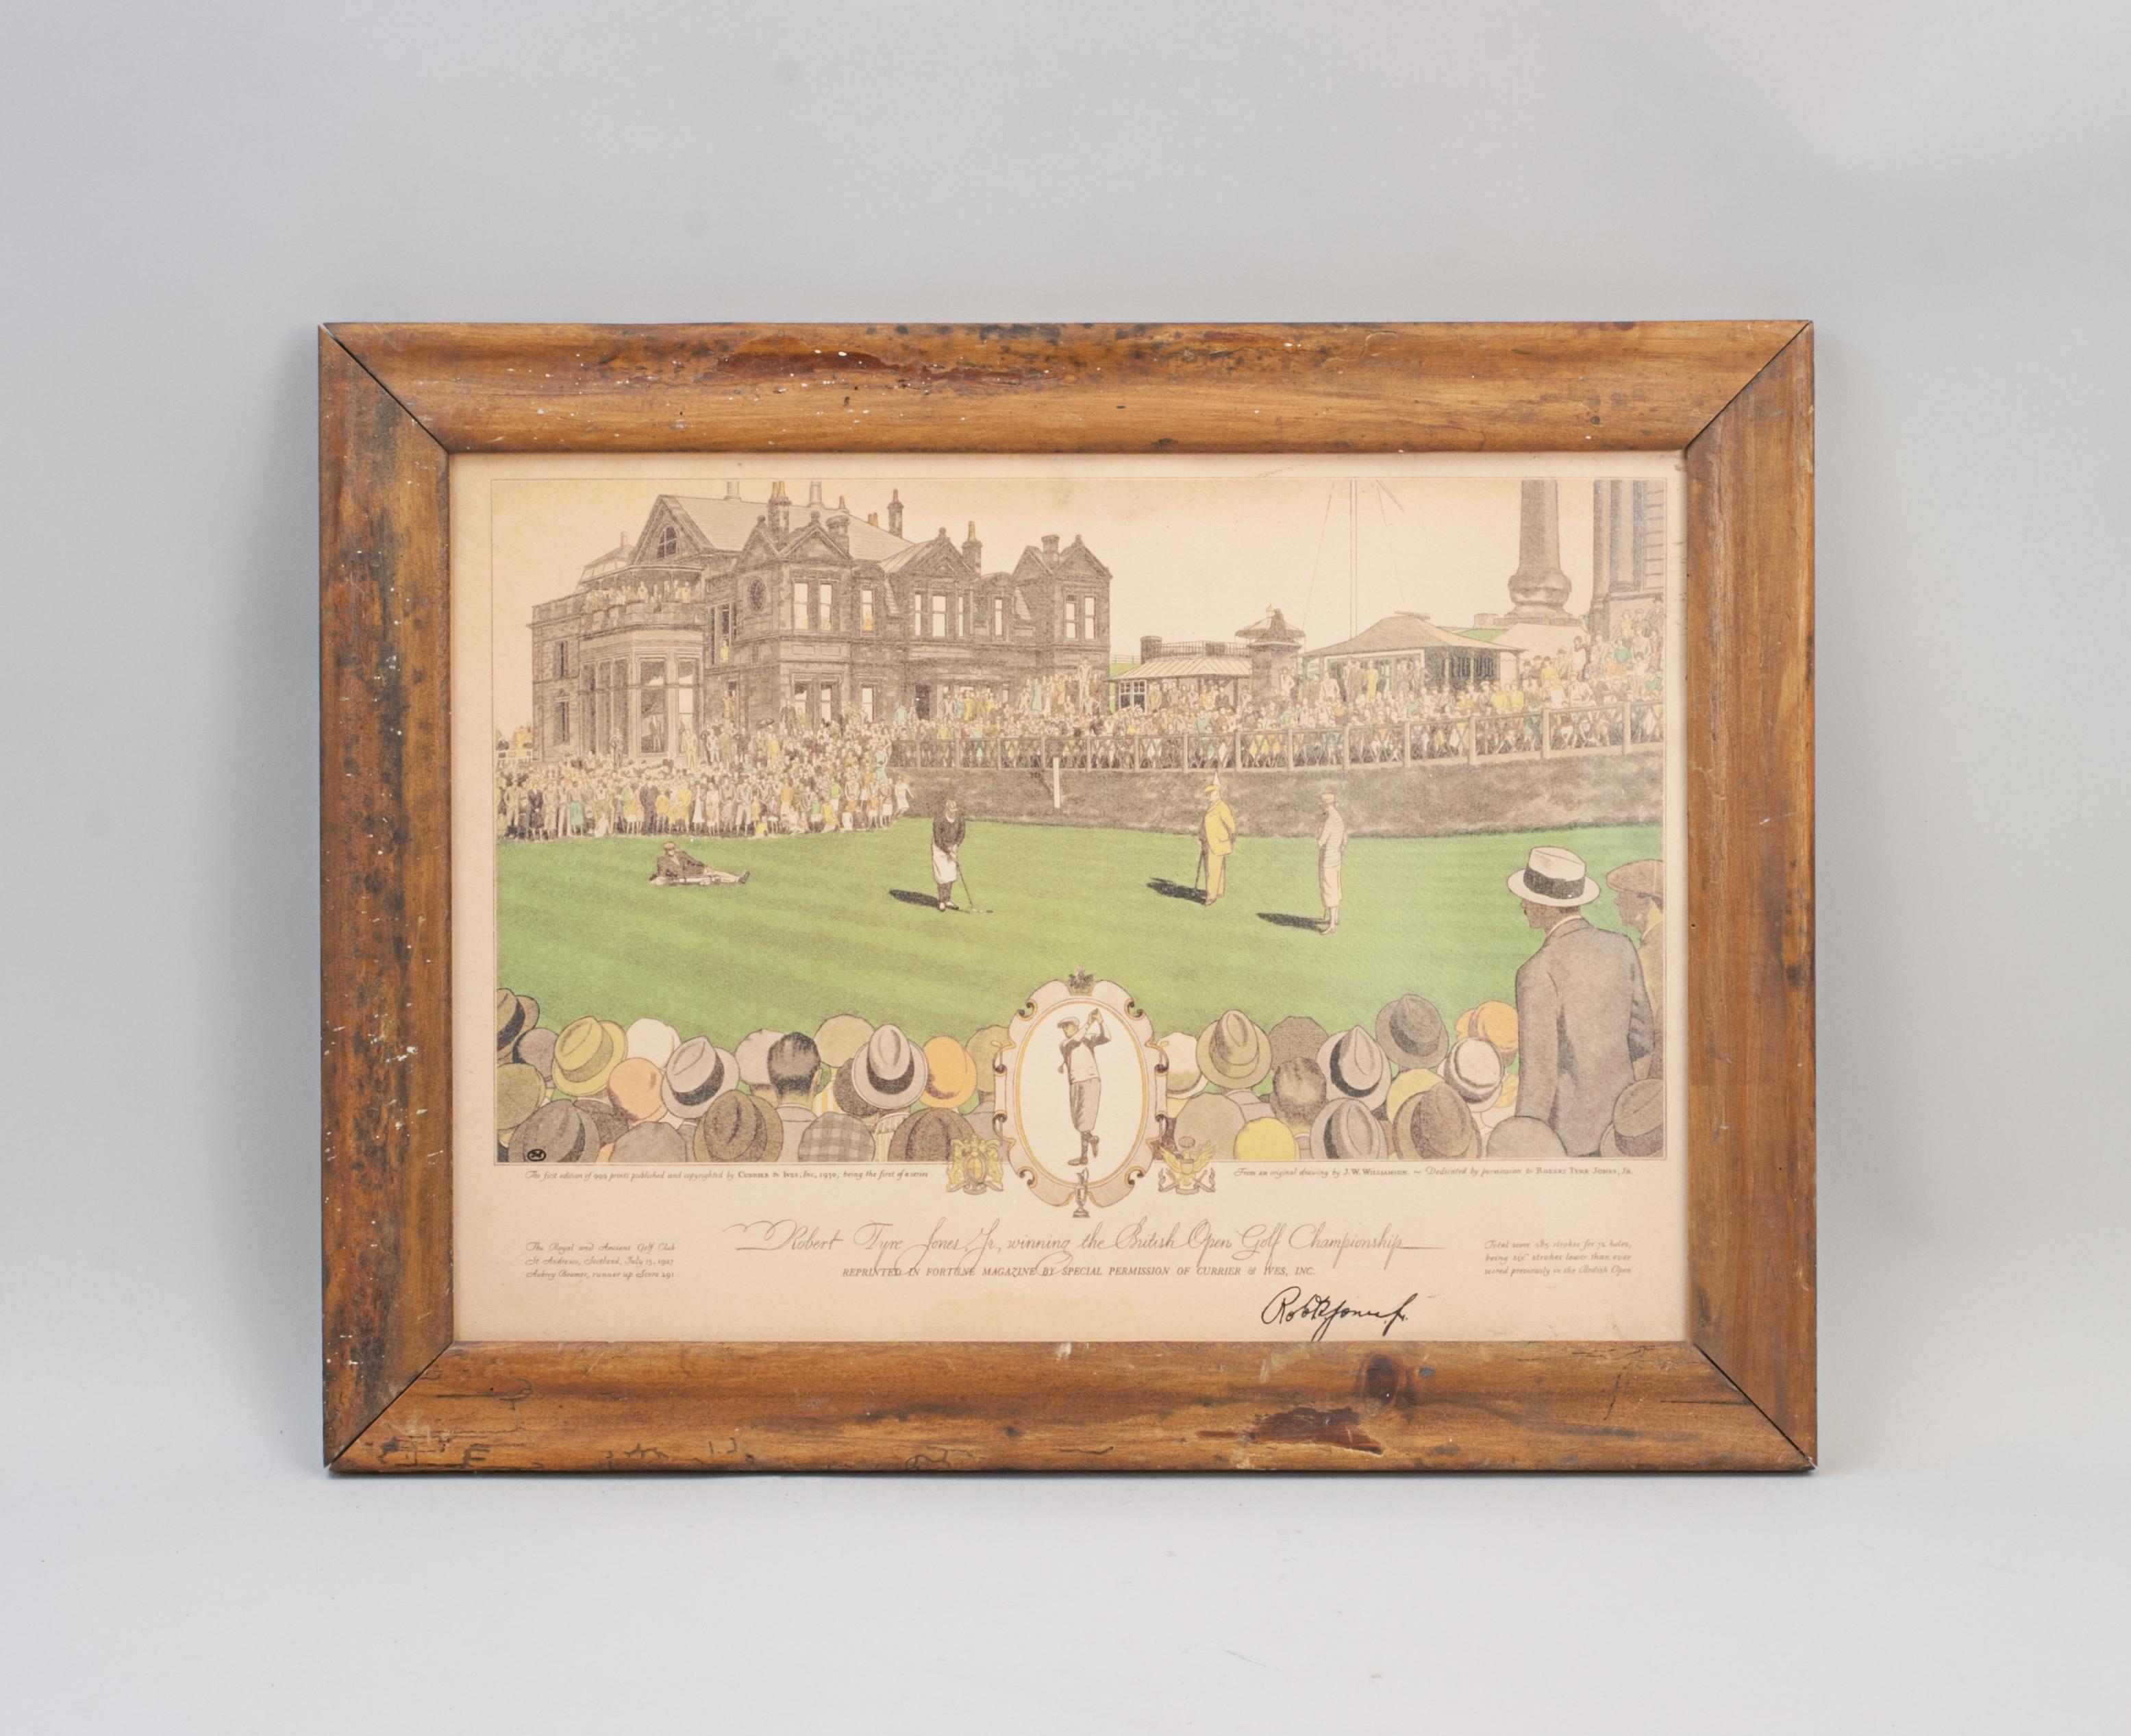 Rare Bobby Jones Signed 1927 Open Golf Championship Picture.
An original 1930 limited edition lithograph titled 